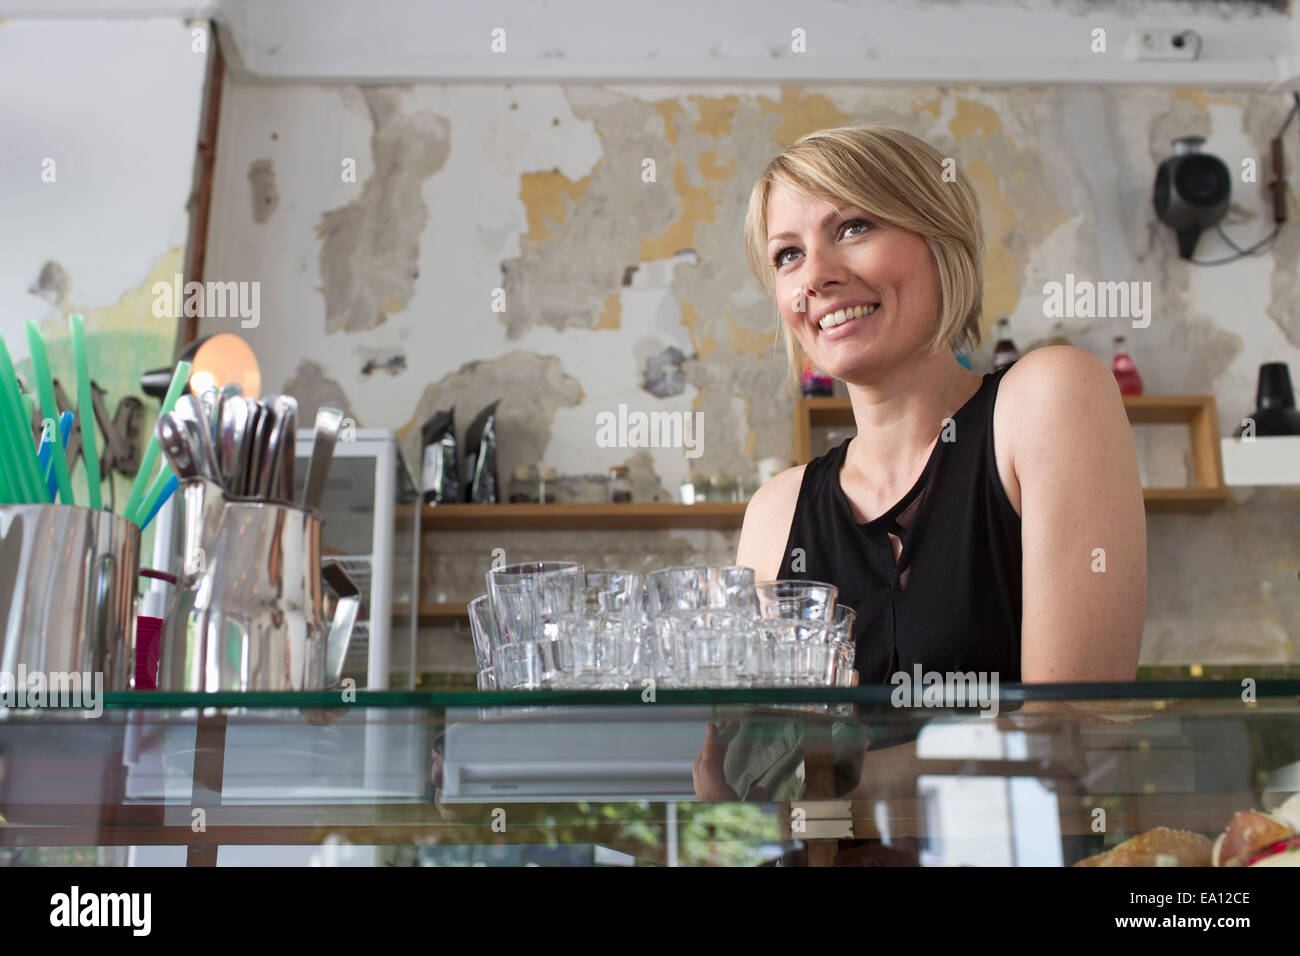 Mid adult woman working in cafe Stock Photo